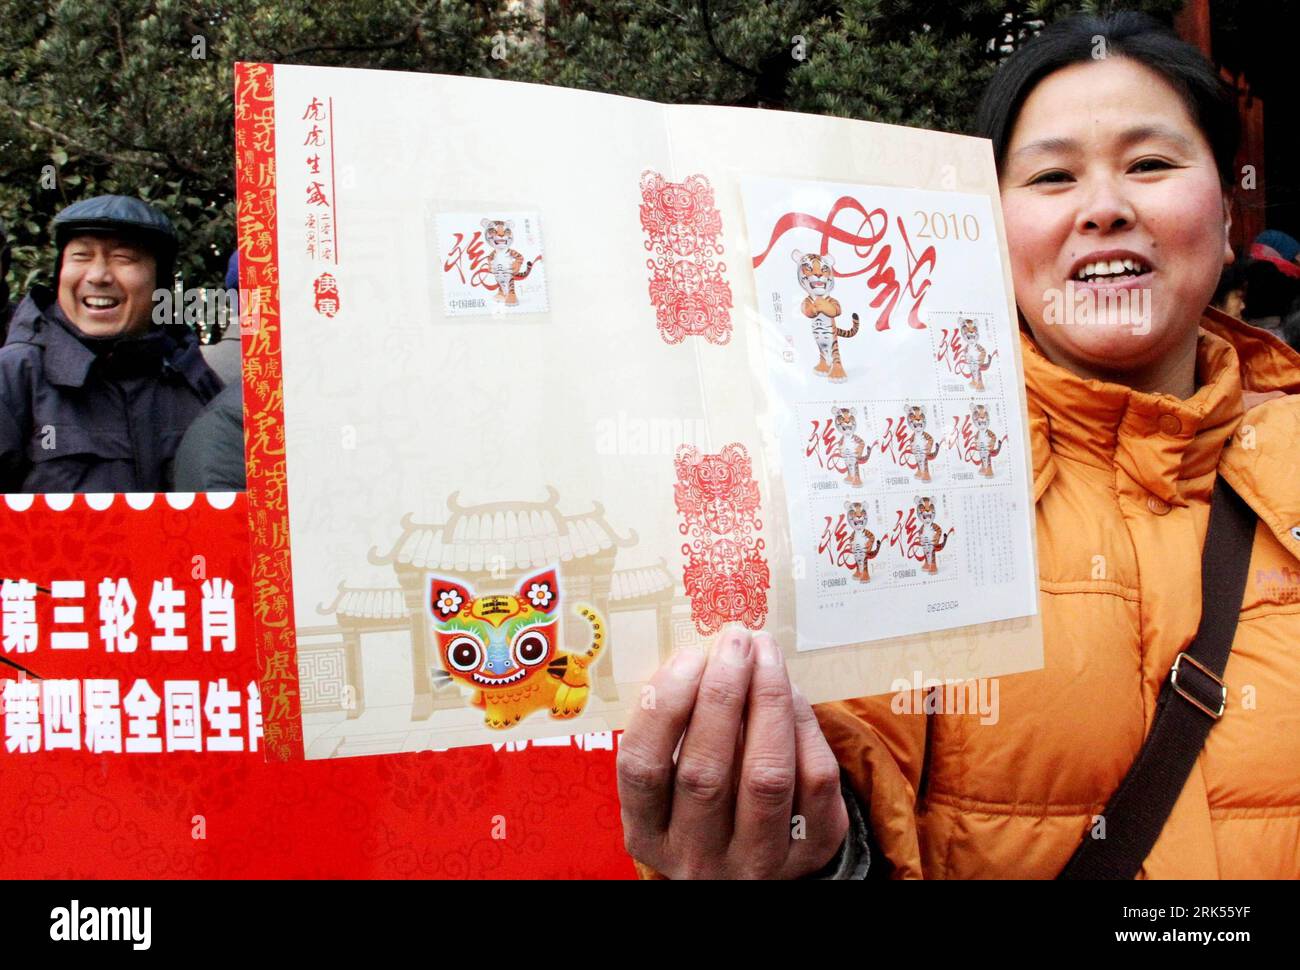 Bildnummer: 53706308  Datum: 05.01.2010  Copyright: imago/Xinhua (100106) -- SUZHOU, Jan. 6, 2010 (Xinhua) -- A woman holds the special stamp for 2010 year of tiger she just bought during the official launching ceremony of the stamp in Suzhou, east China s Jiangsu Province, Jan. 5, 2010. Designers with Tsinghua University put a lovely tiger figure along with a traditional red Chinese character called Fu , means luck on the stamp, which symbolizes the tiger will bring luck and happiness to the in the approaching lunar new year. Nominal value of the stamp is 1.2 RMB yuan. (Xinhua/Wang Jiankang) Stock Photo